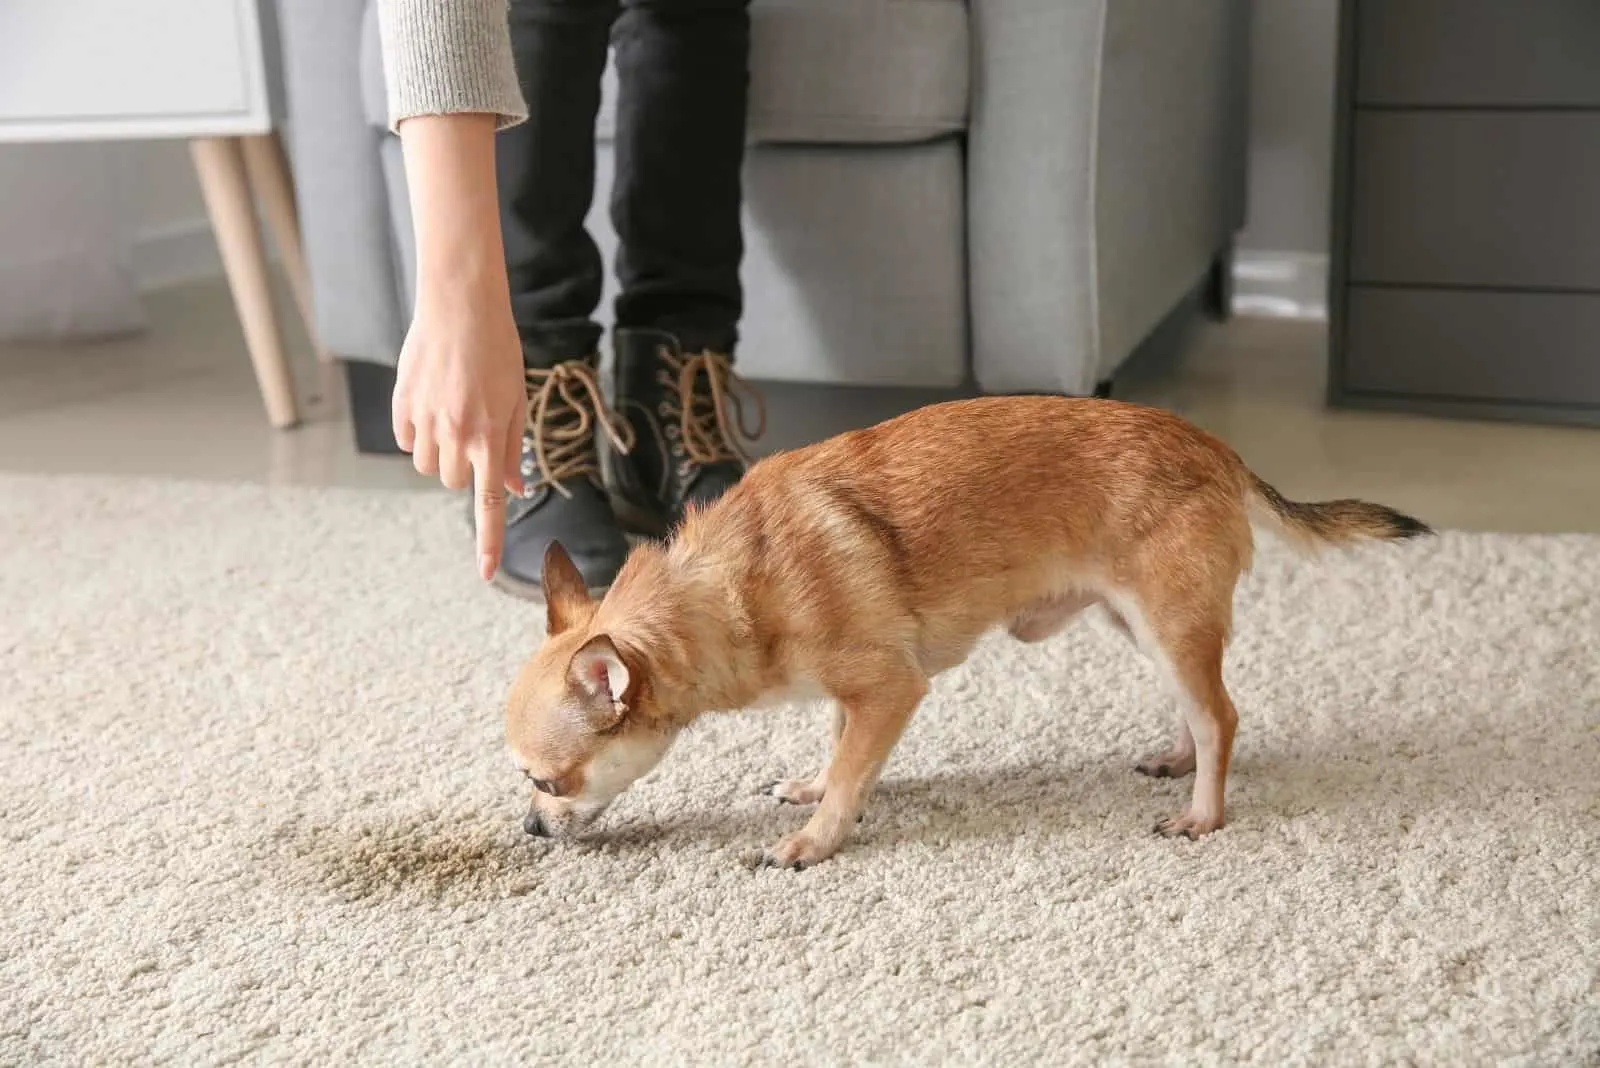 chihuahua smelling wet part on the carpet as pointed by the owner inside the house 